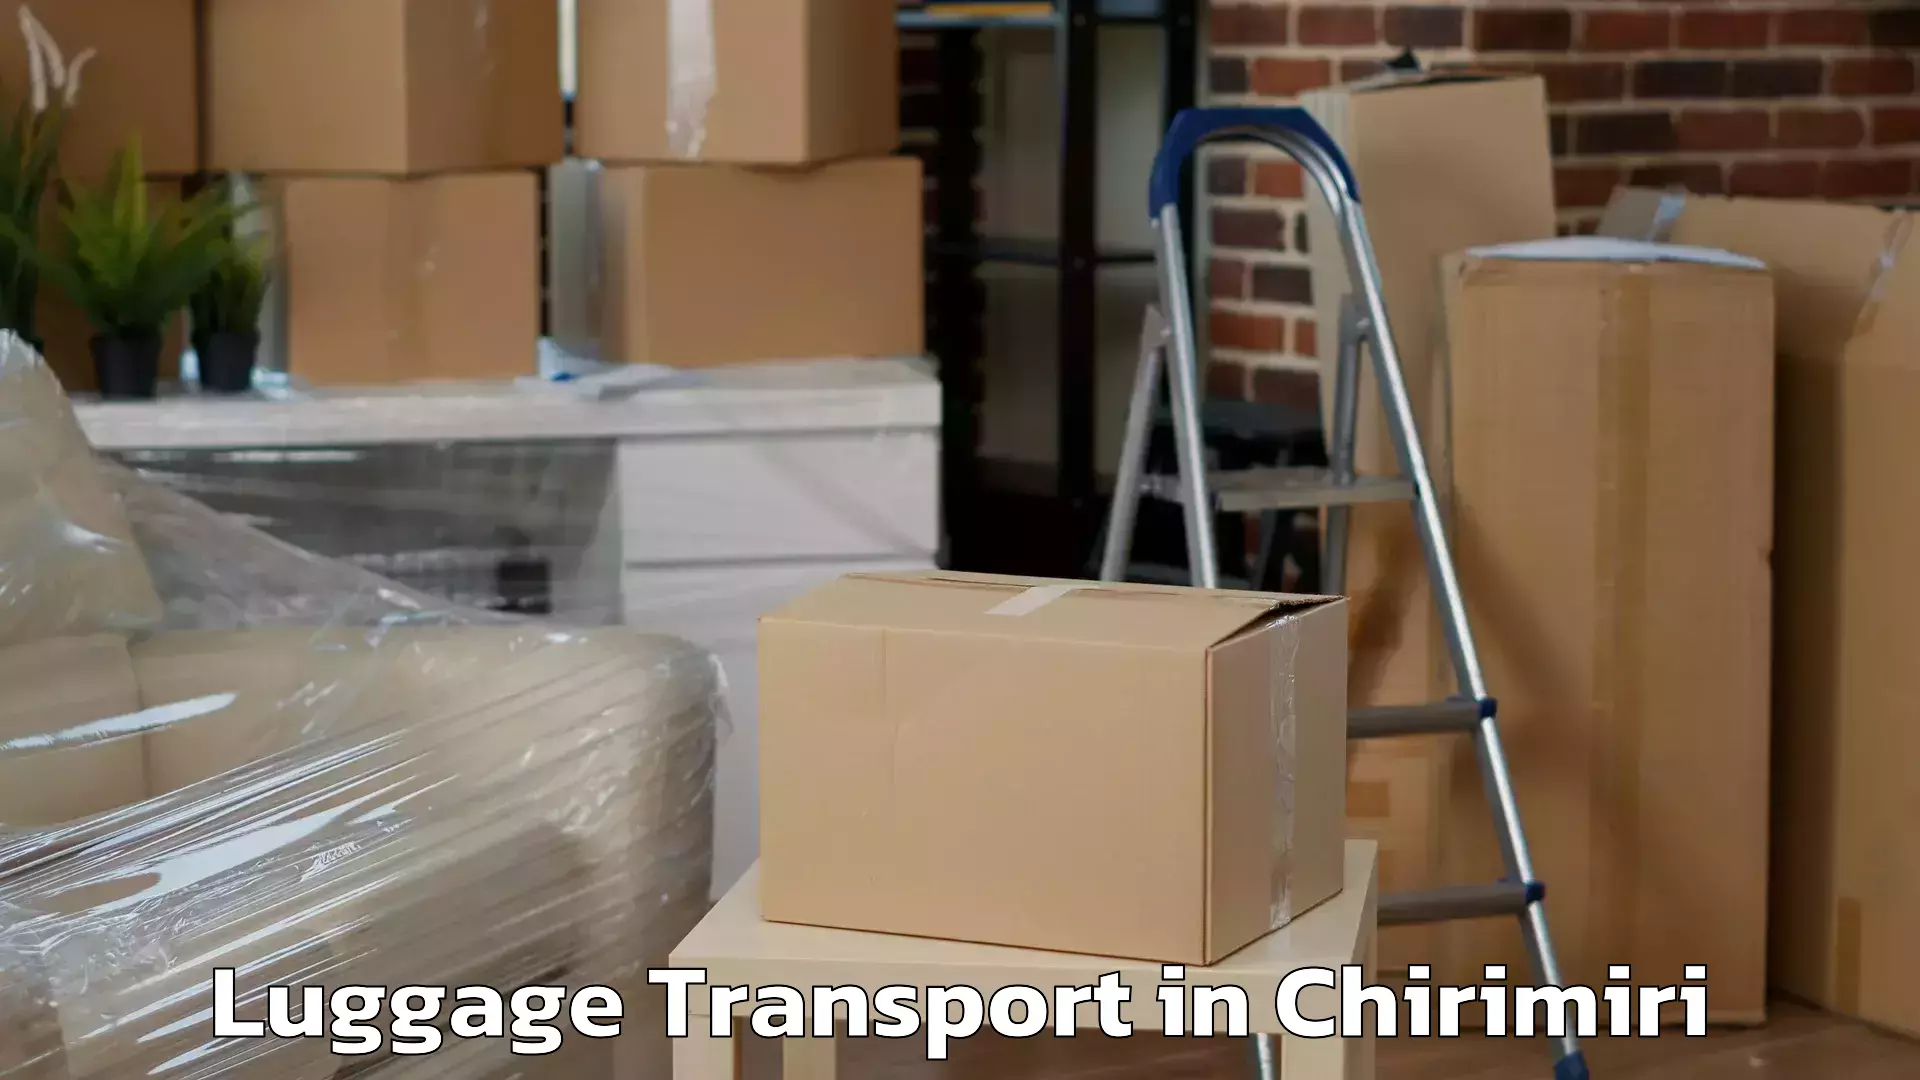 Luggage shipment specialists in Chirimiri